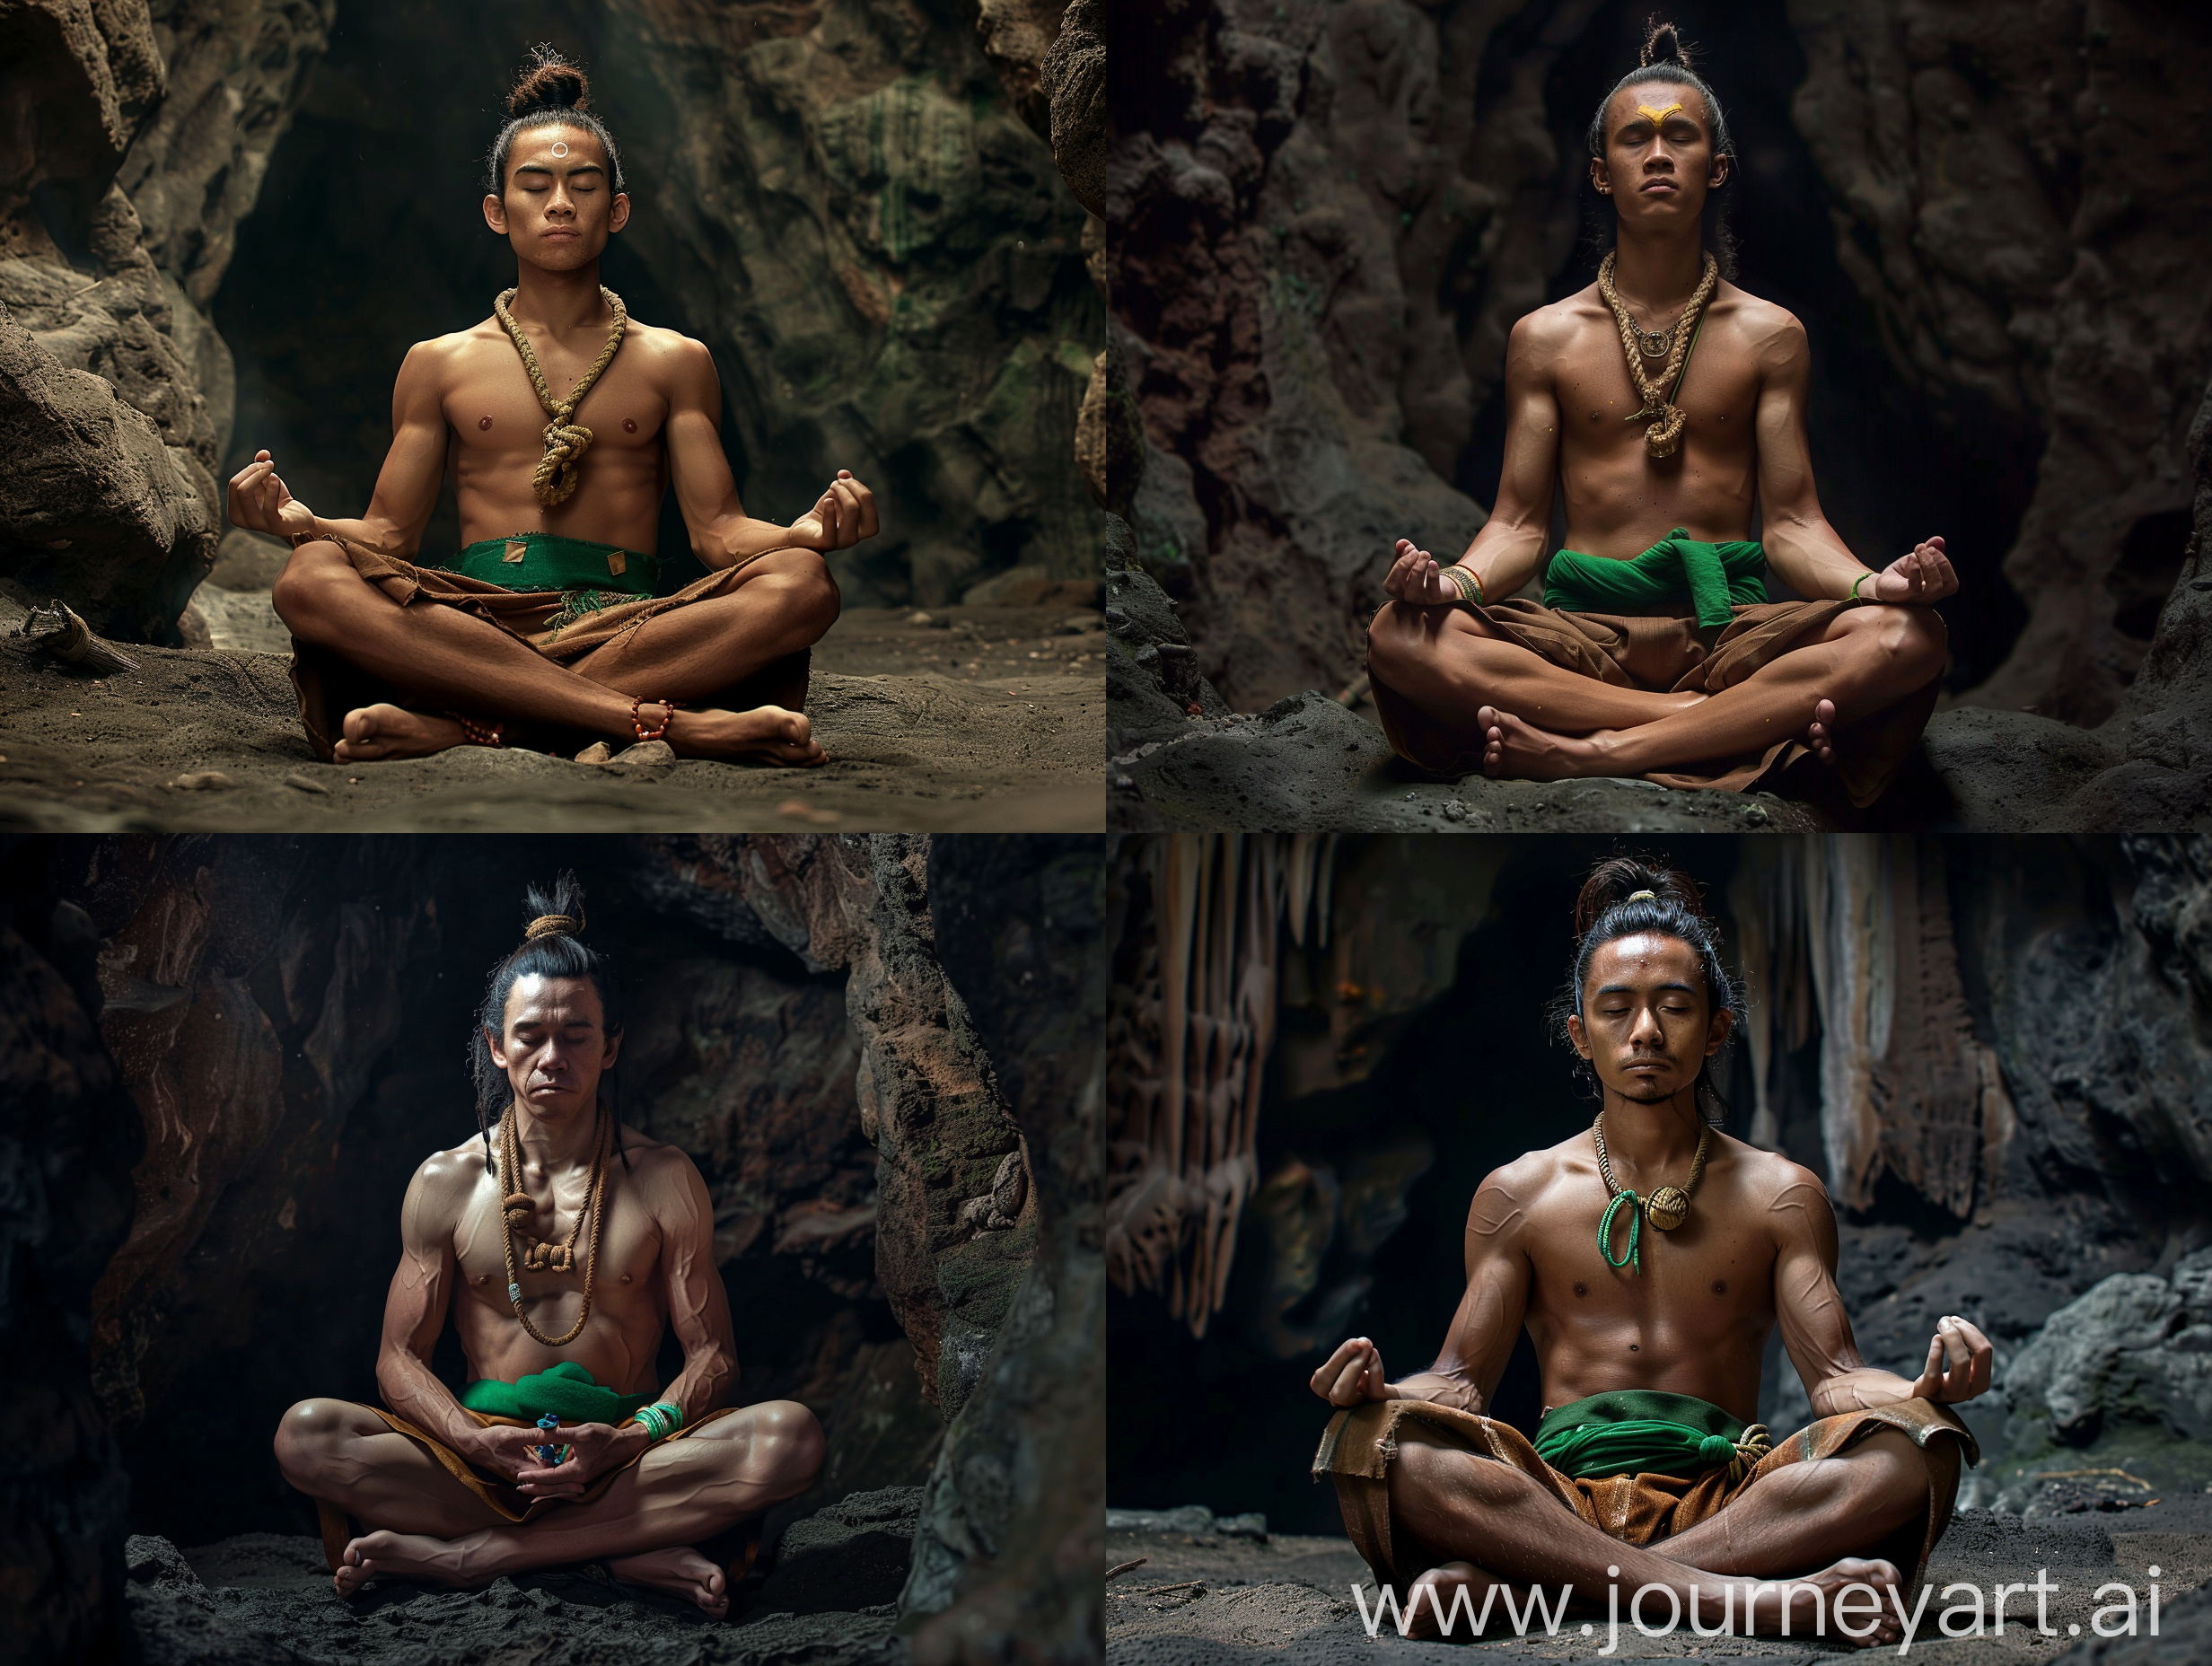 Cinematic, movie style, 30 year old Indonesian man with square and clean face, long hair in a small bun, stocky body, wearing a rope necklace, green cloth bracelet, brown shorts, green cloth belt, strappy sandals, sitting in meditation in a dark cave , Very detailed, very real, ultra HD